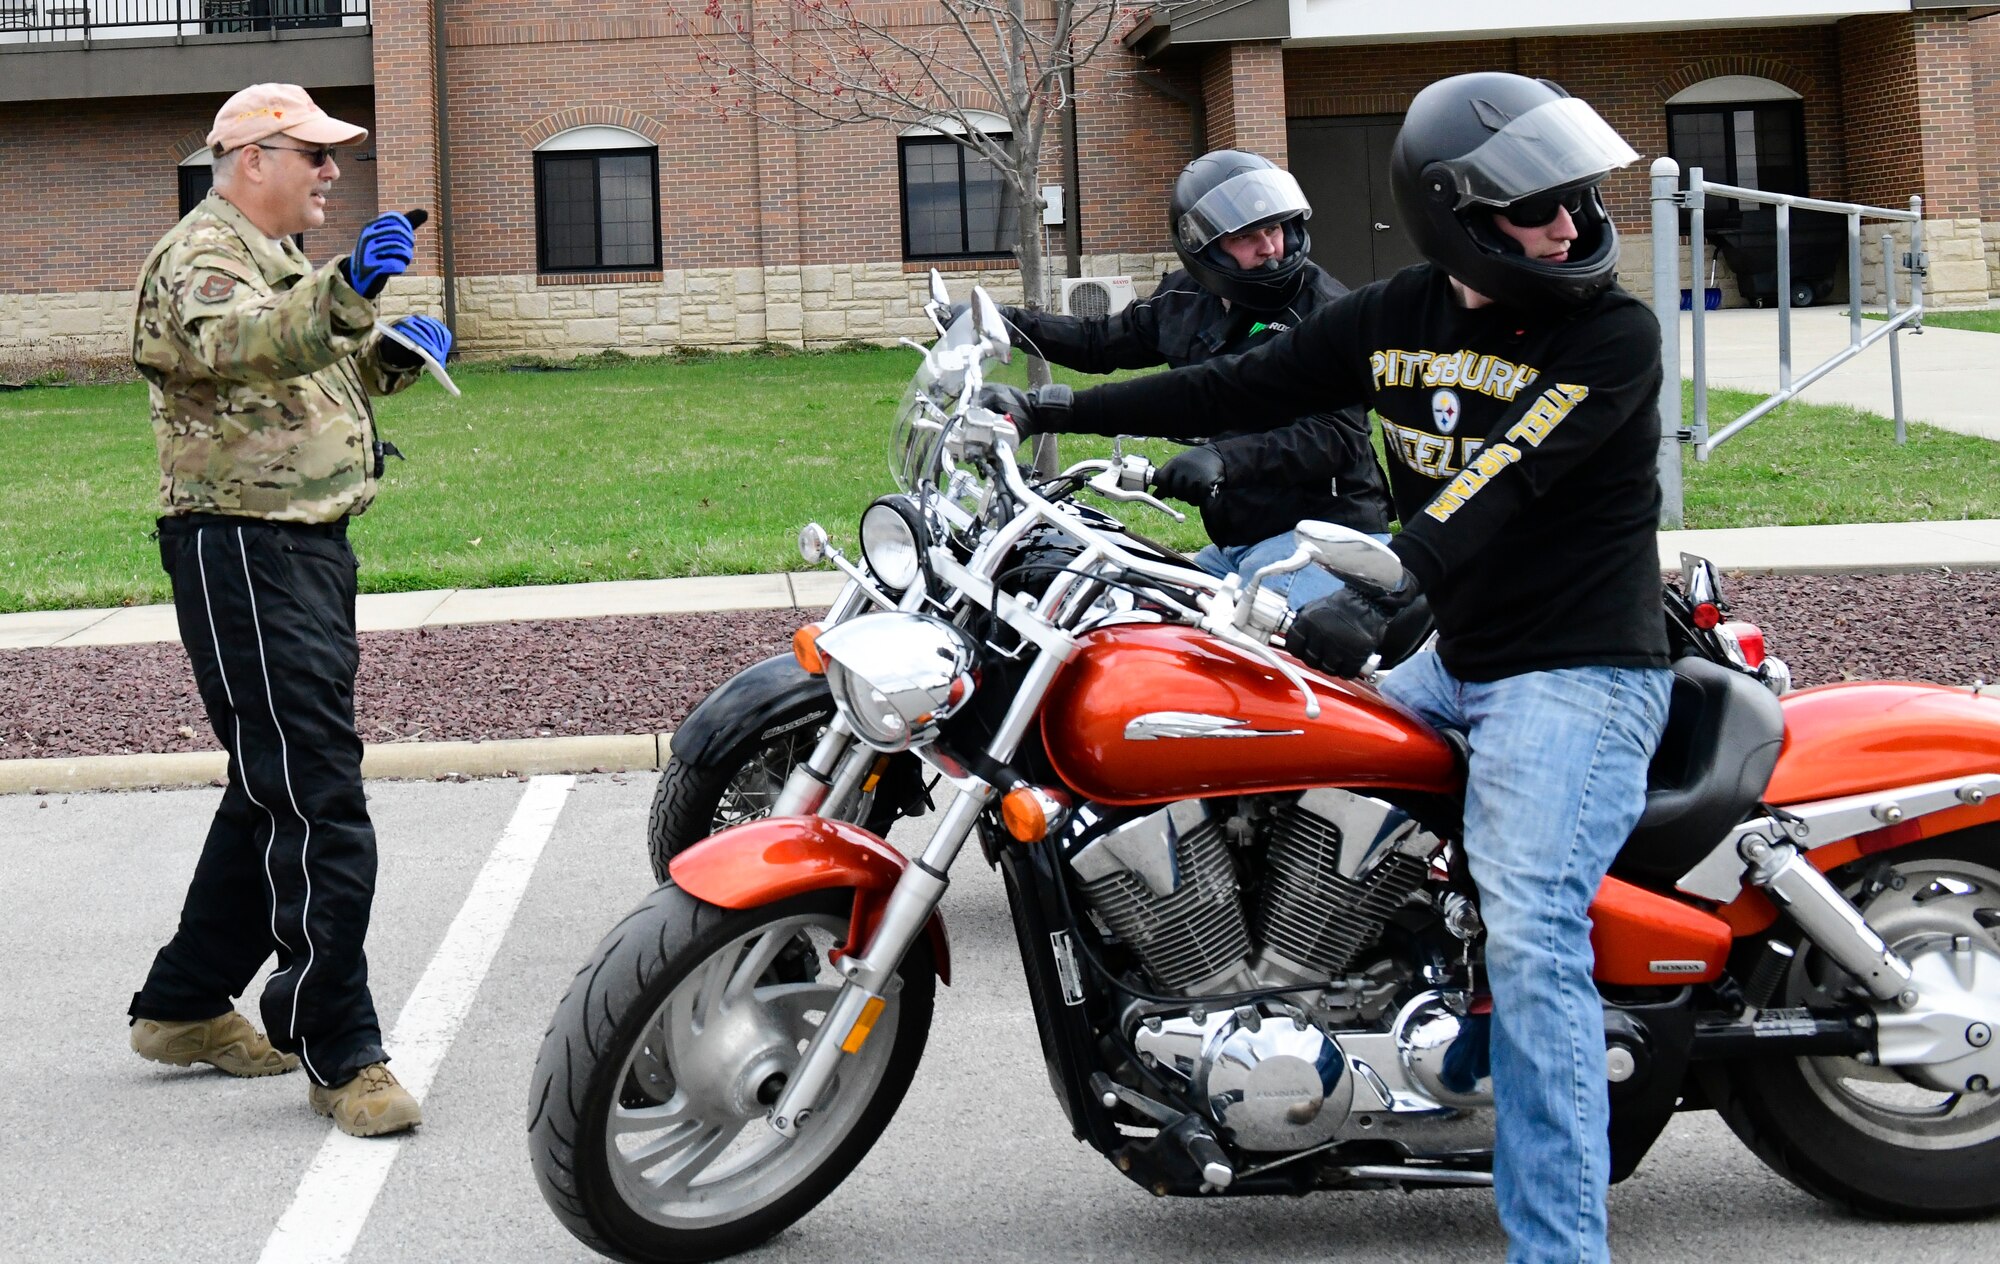 Senior Master Sgt. Vince Bartlomain, a standards and evaluation flight engineer assigned to the 910th Operations Group, instructs motorcycle safety participants on April 12, 2019, at a parking lot in YARS.